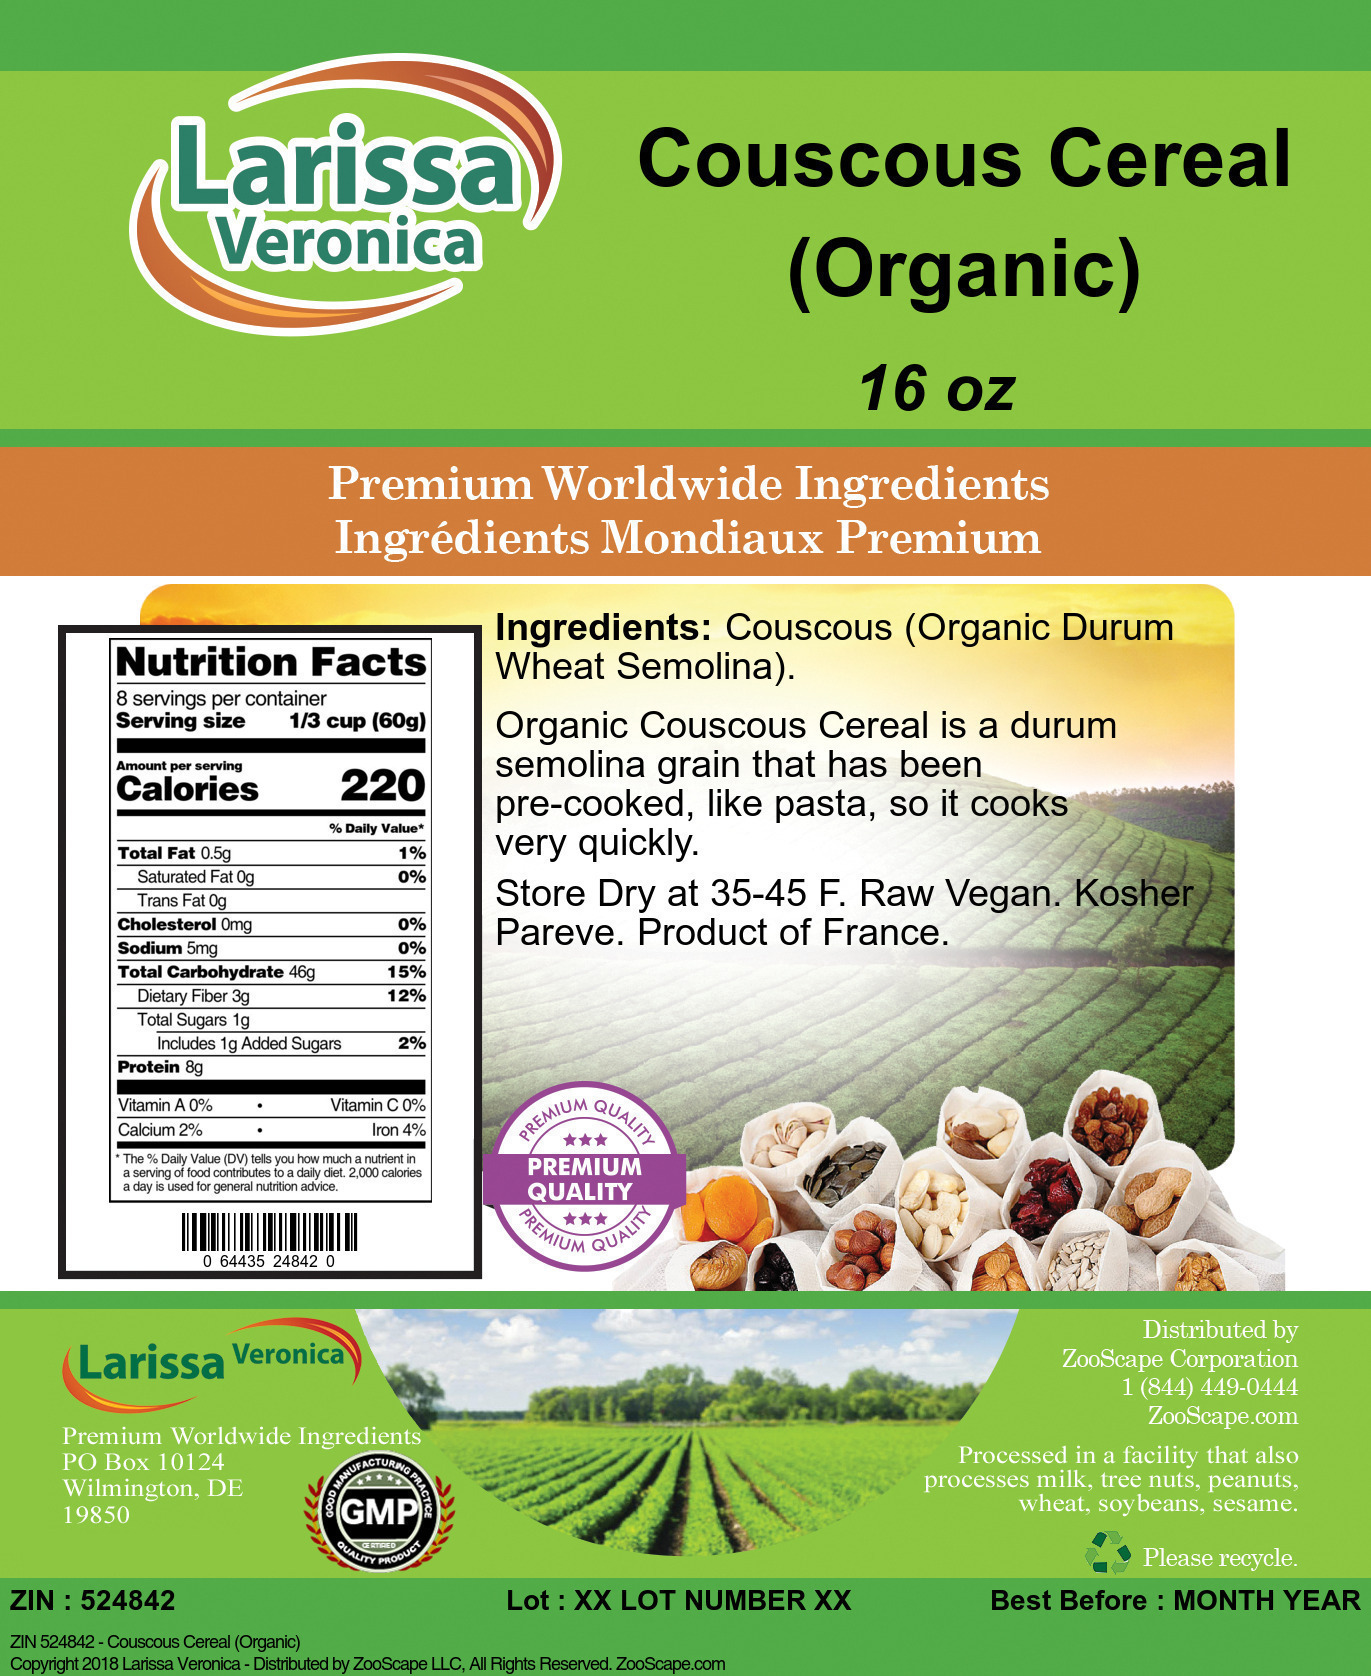 Couscous Cereal (Organic) - Label